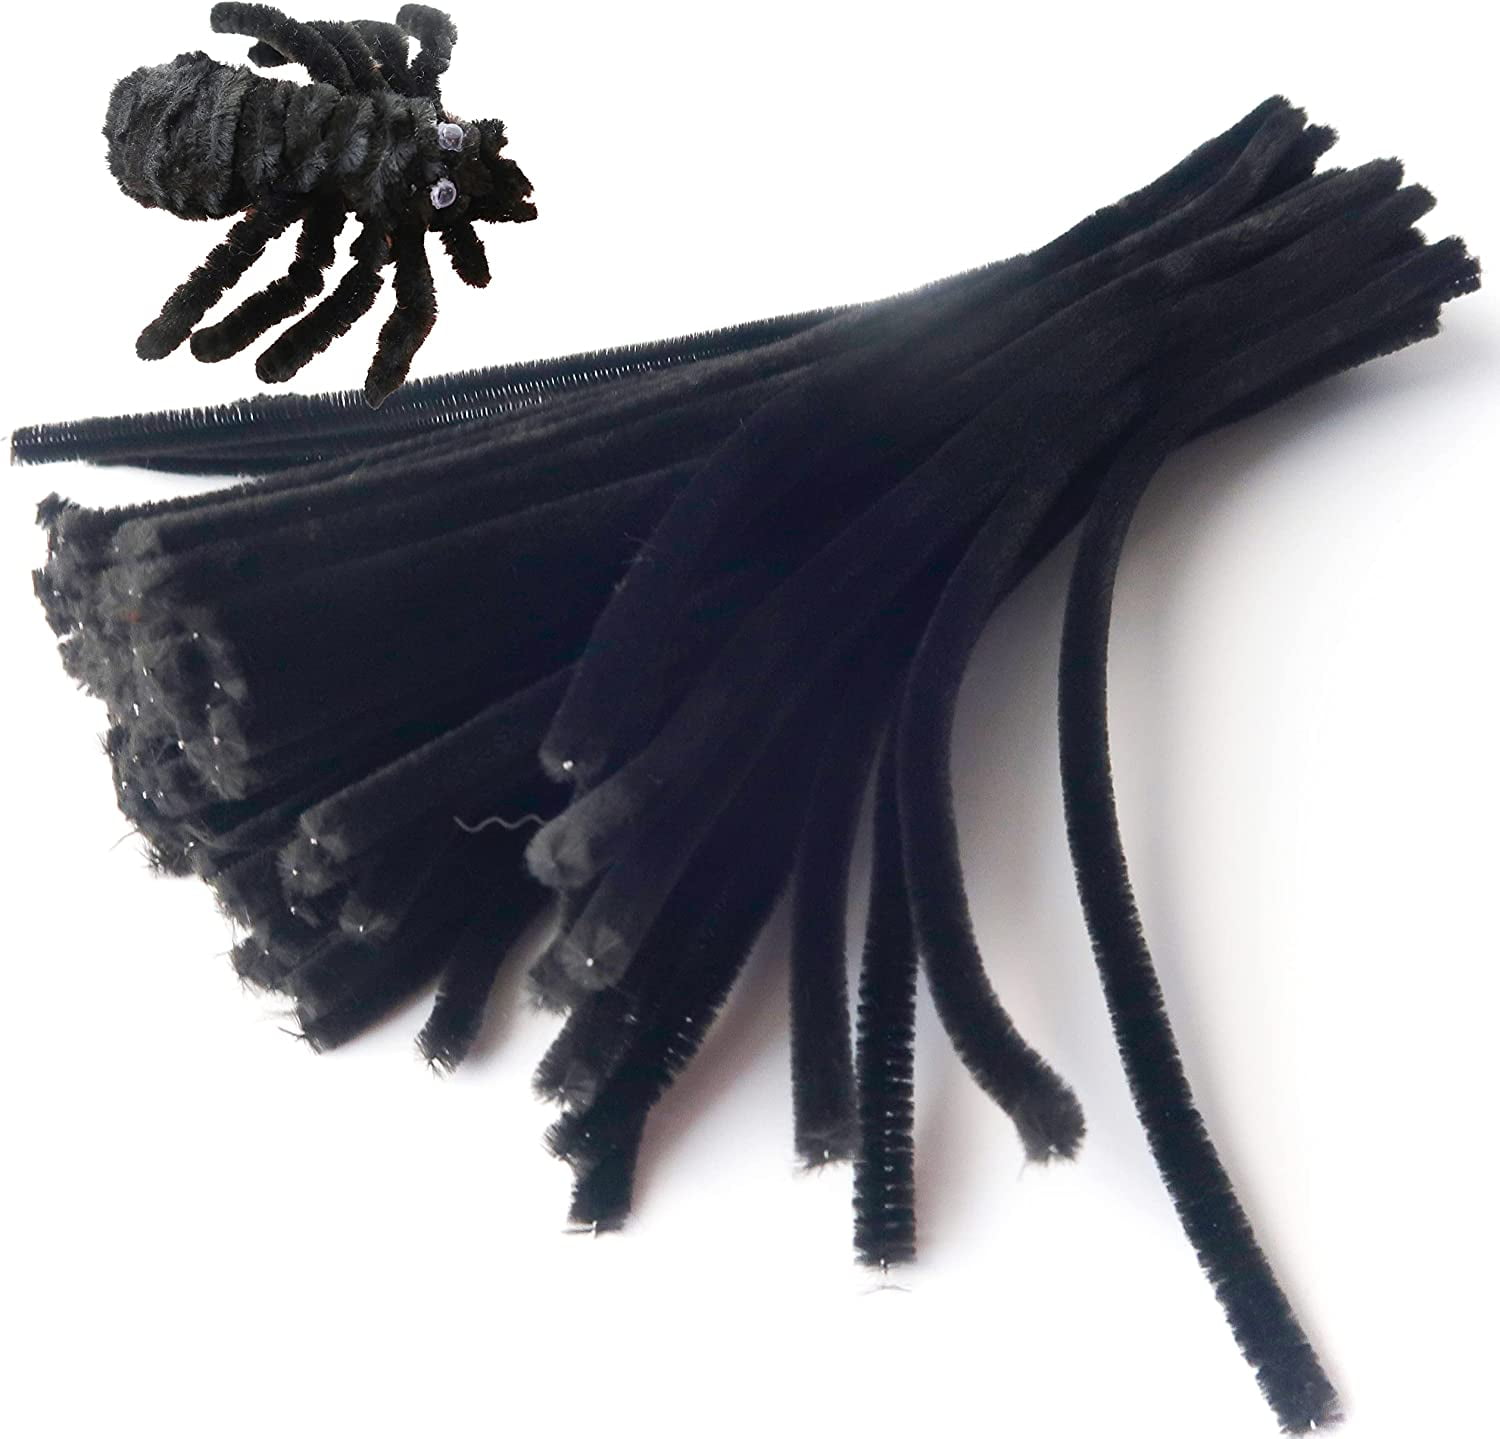 Cuttte Pipe Cleaners Craft Supplies - 100pcs Black Pipe Cleaners Craft Kids  DIY Art Supplies, Pipe Cleaner Chenille Stems, Black Pipe Cleaners Bulk (6